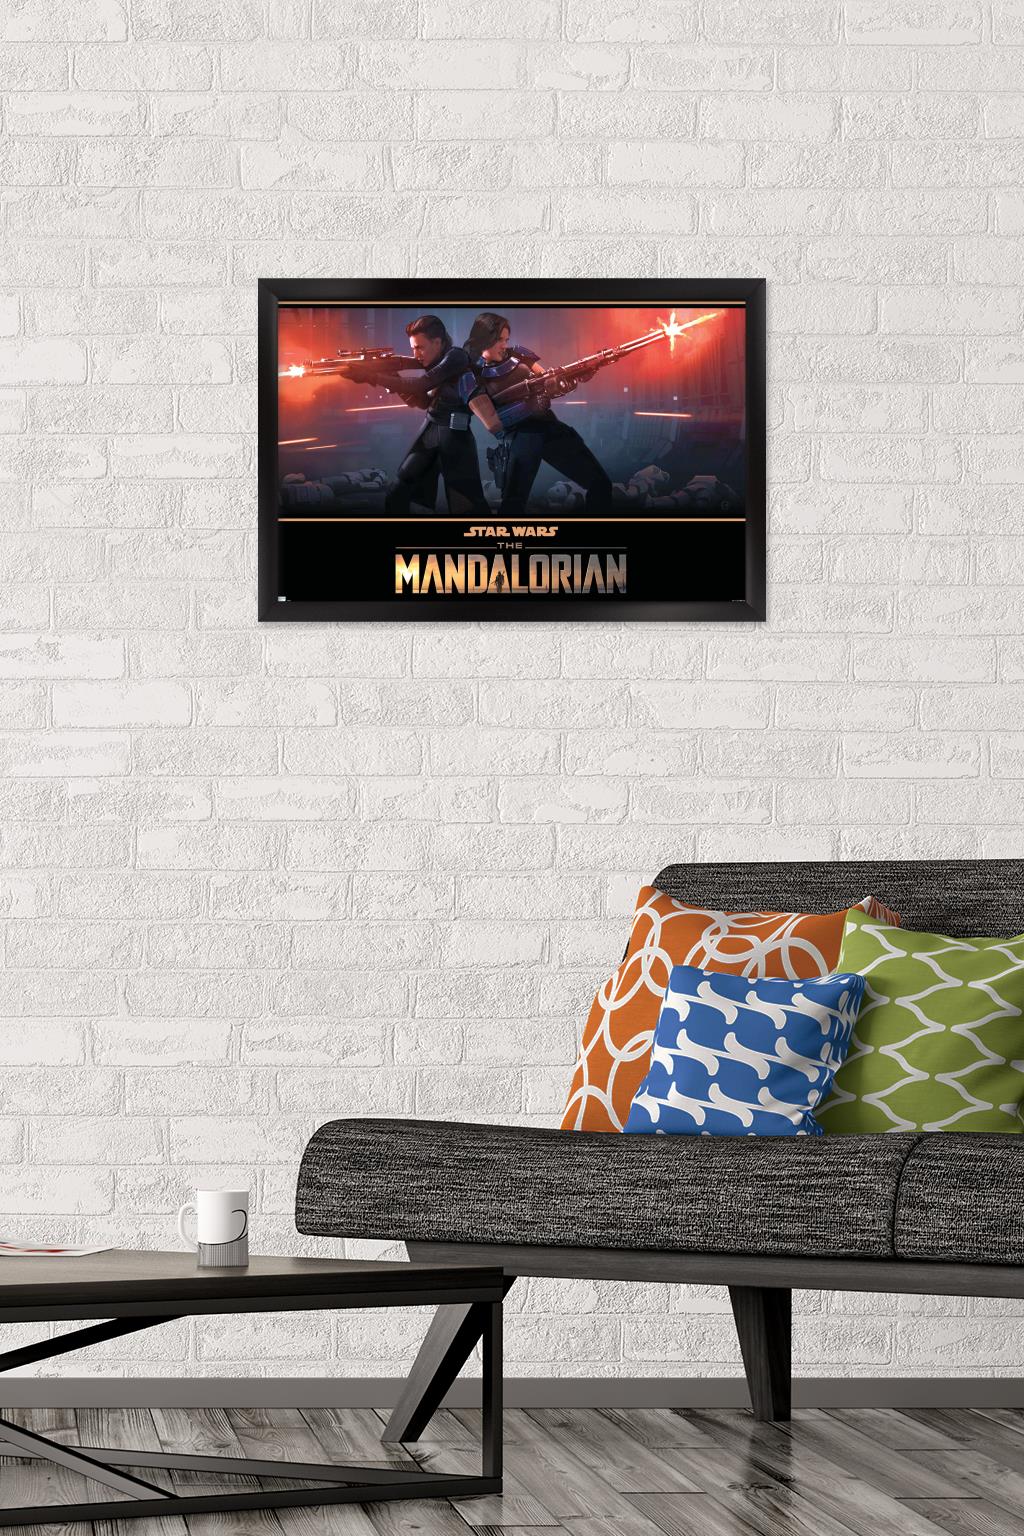 Star Wars: The Mandalorian Season 2 - Back to Back Wall Poster, 14.725" x 22.375", Framed - image 2 of 5